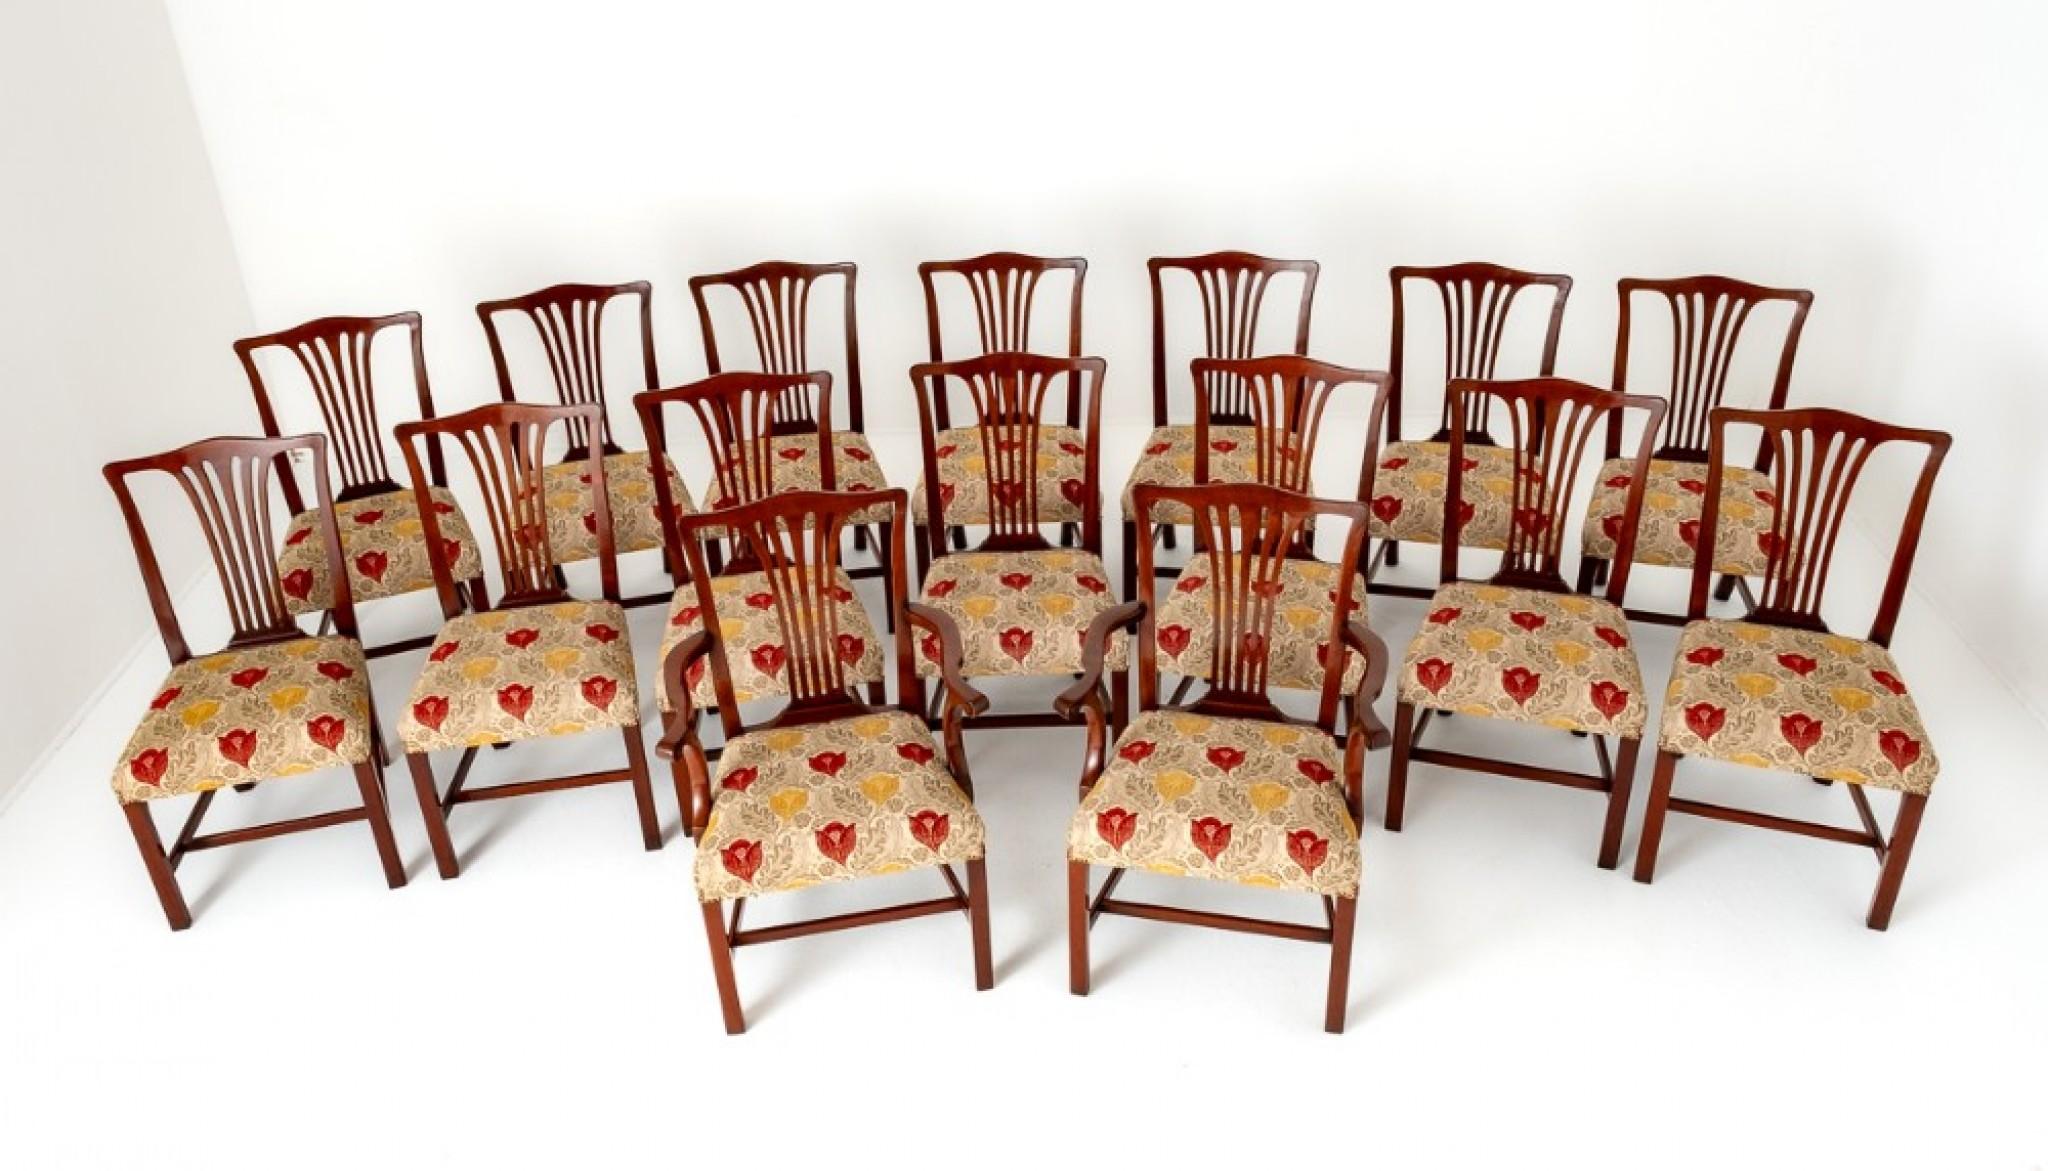 Set of 16 (14 + 2) Mahogany Chippendale Style Dining Chairs.
These Chairs Stand upon Square Legs with an 